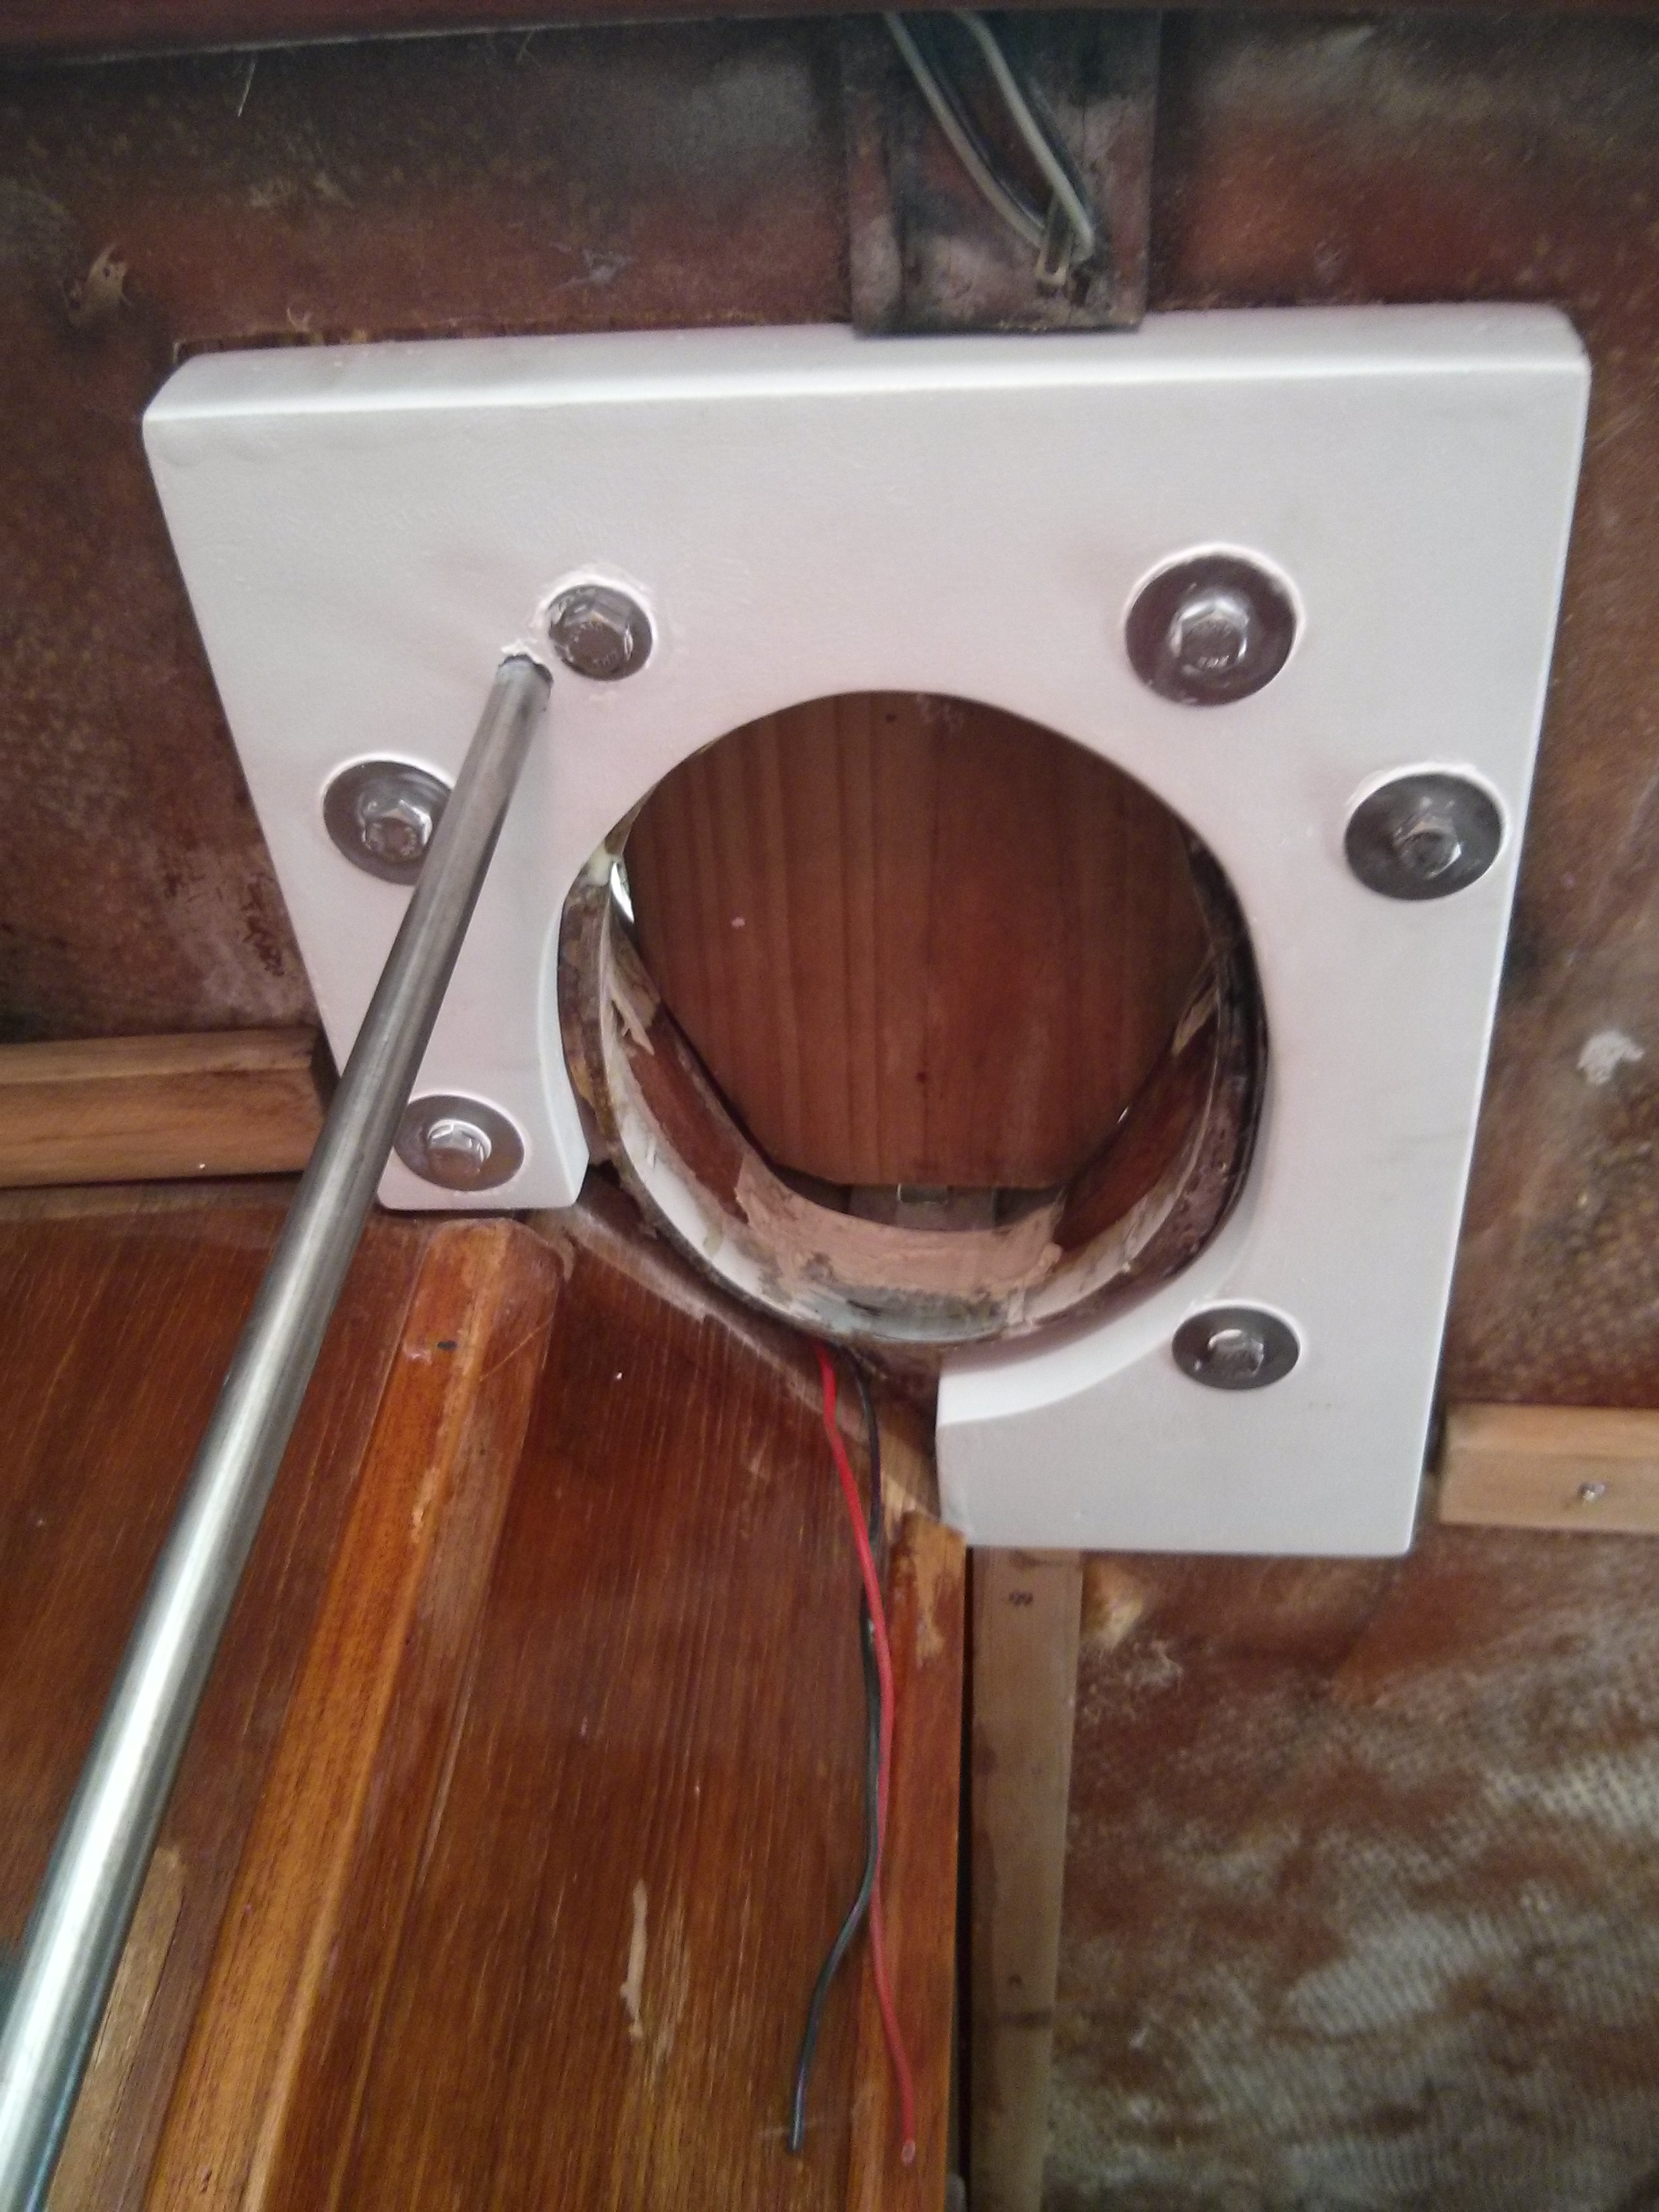 New Mast Collar Backing Plate Installed